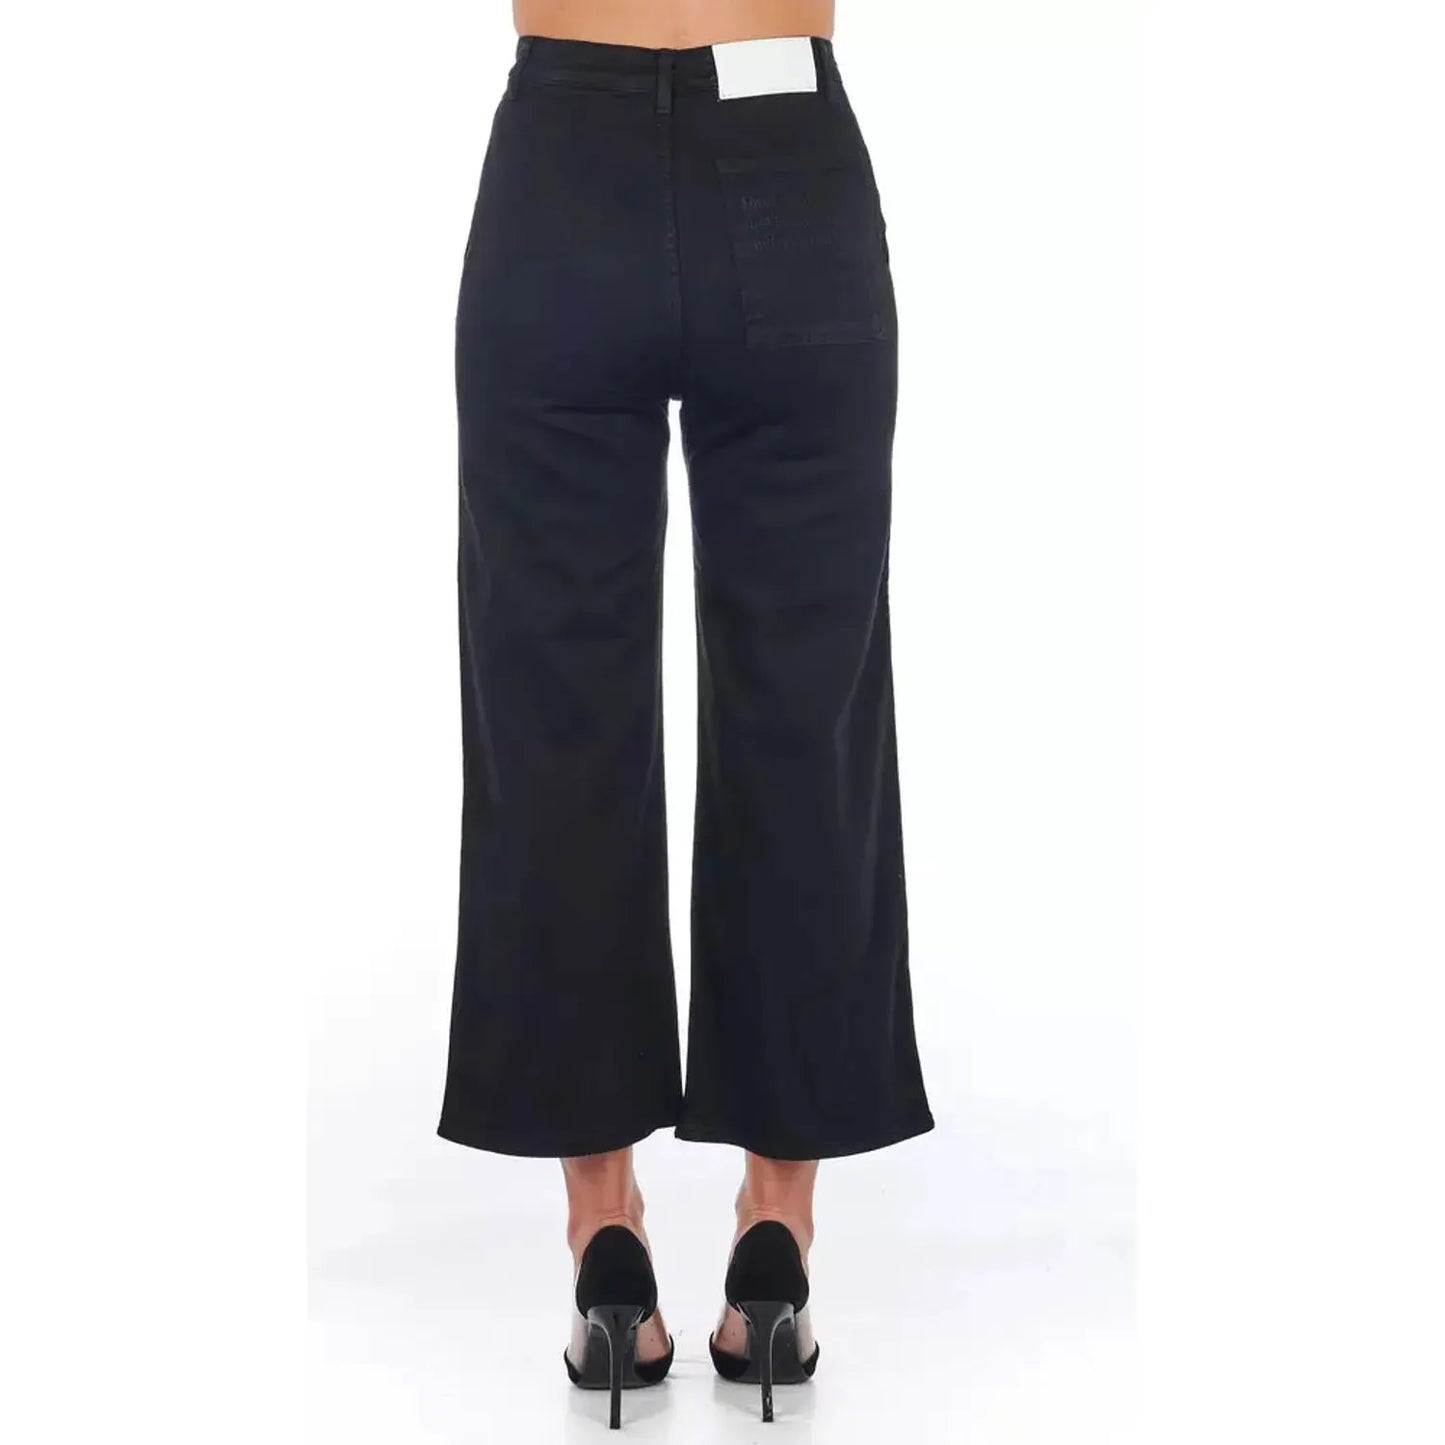 Frankie Morello Chic High-Waist Cropped Trousers nblack-jeans-pant